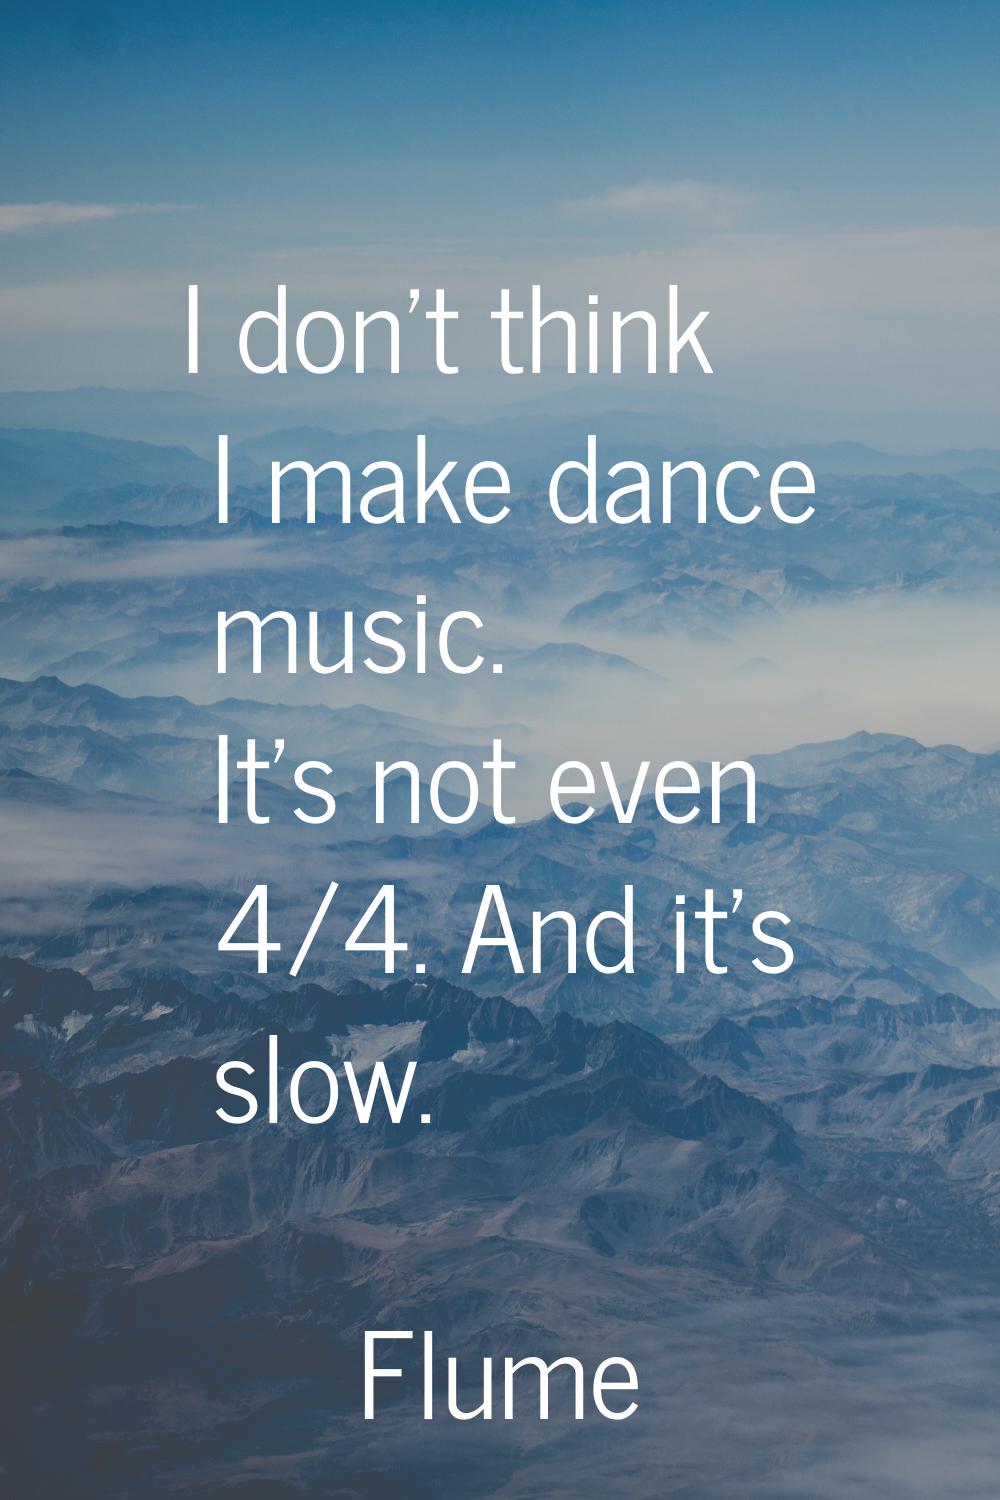 I don't think I make dance music. It's not even 4/4. And it's slow.